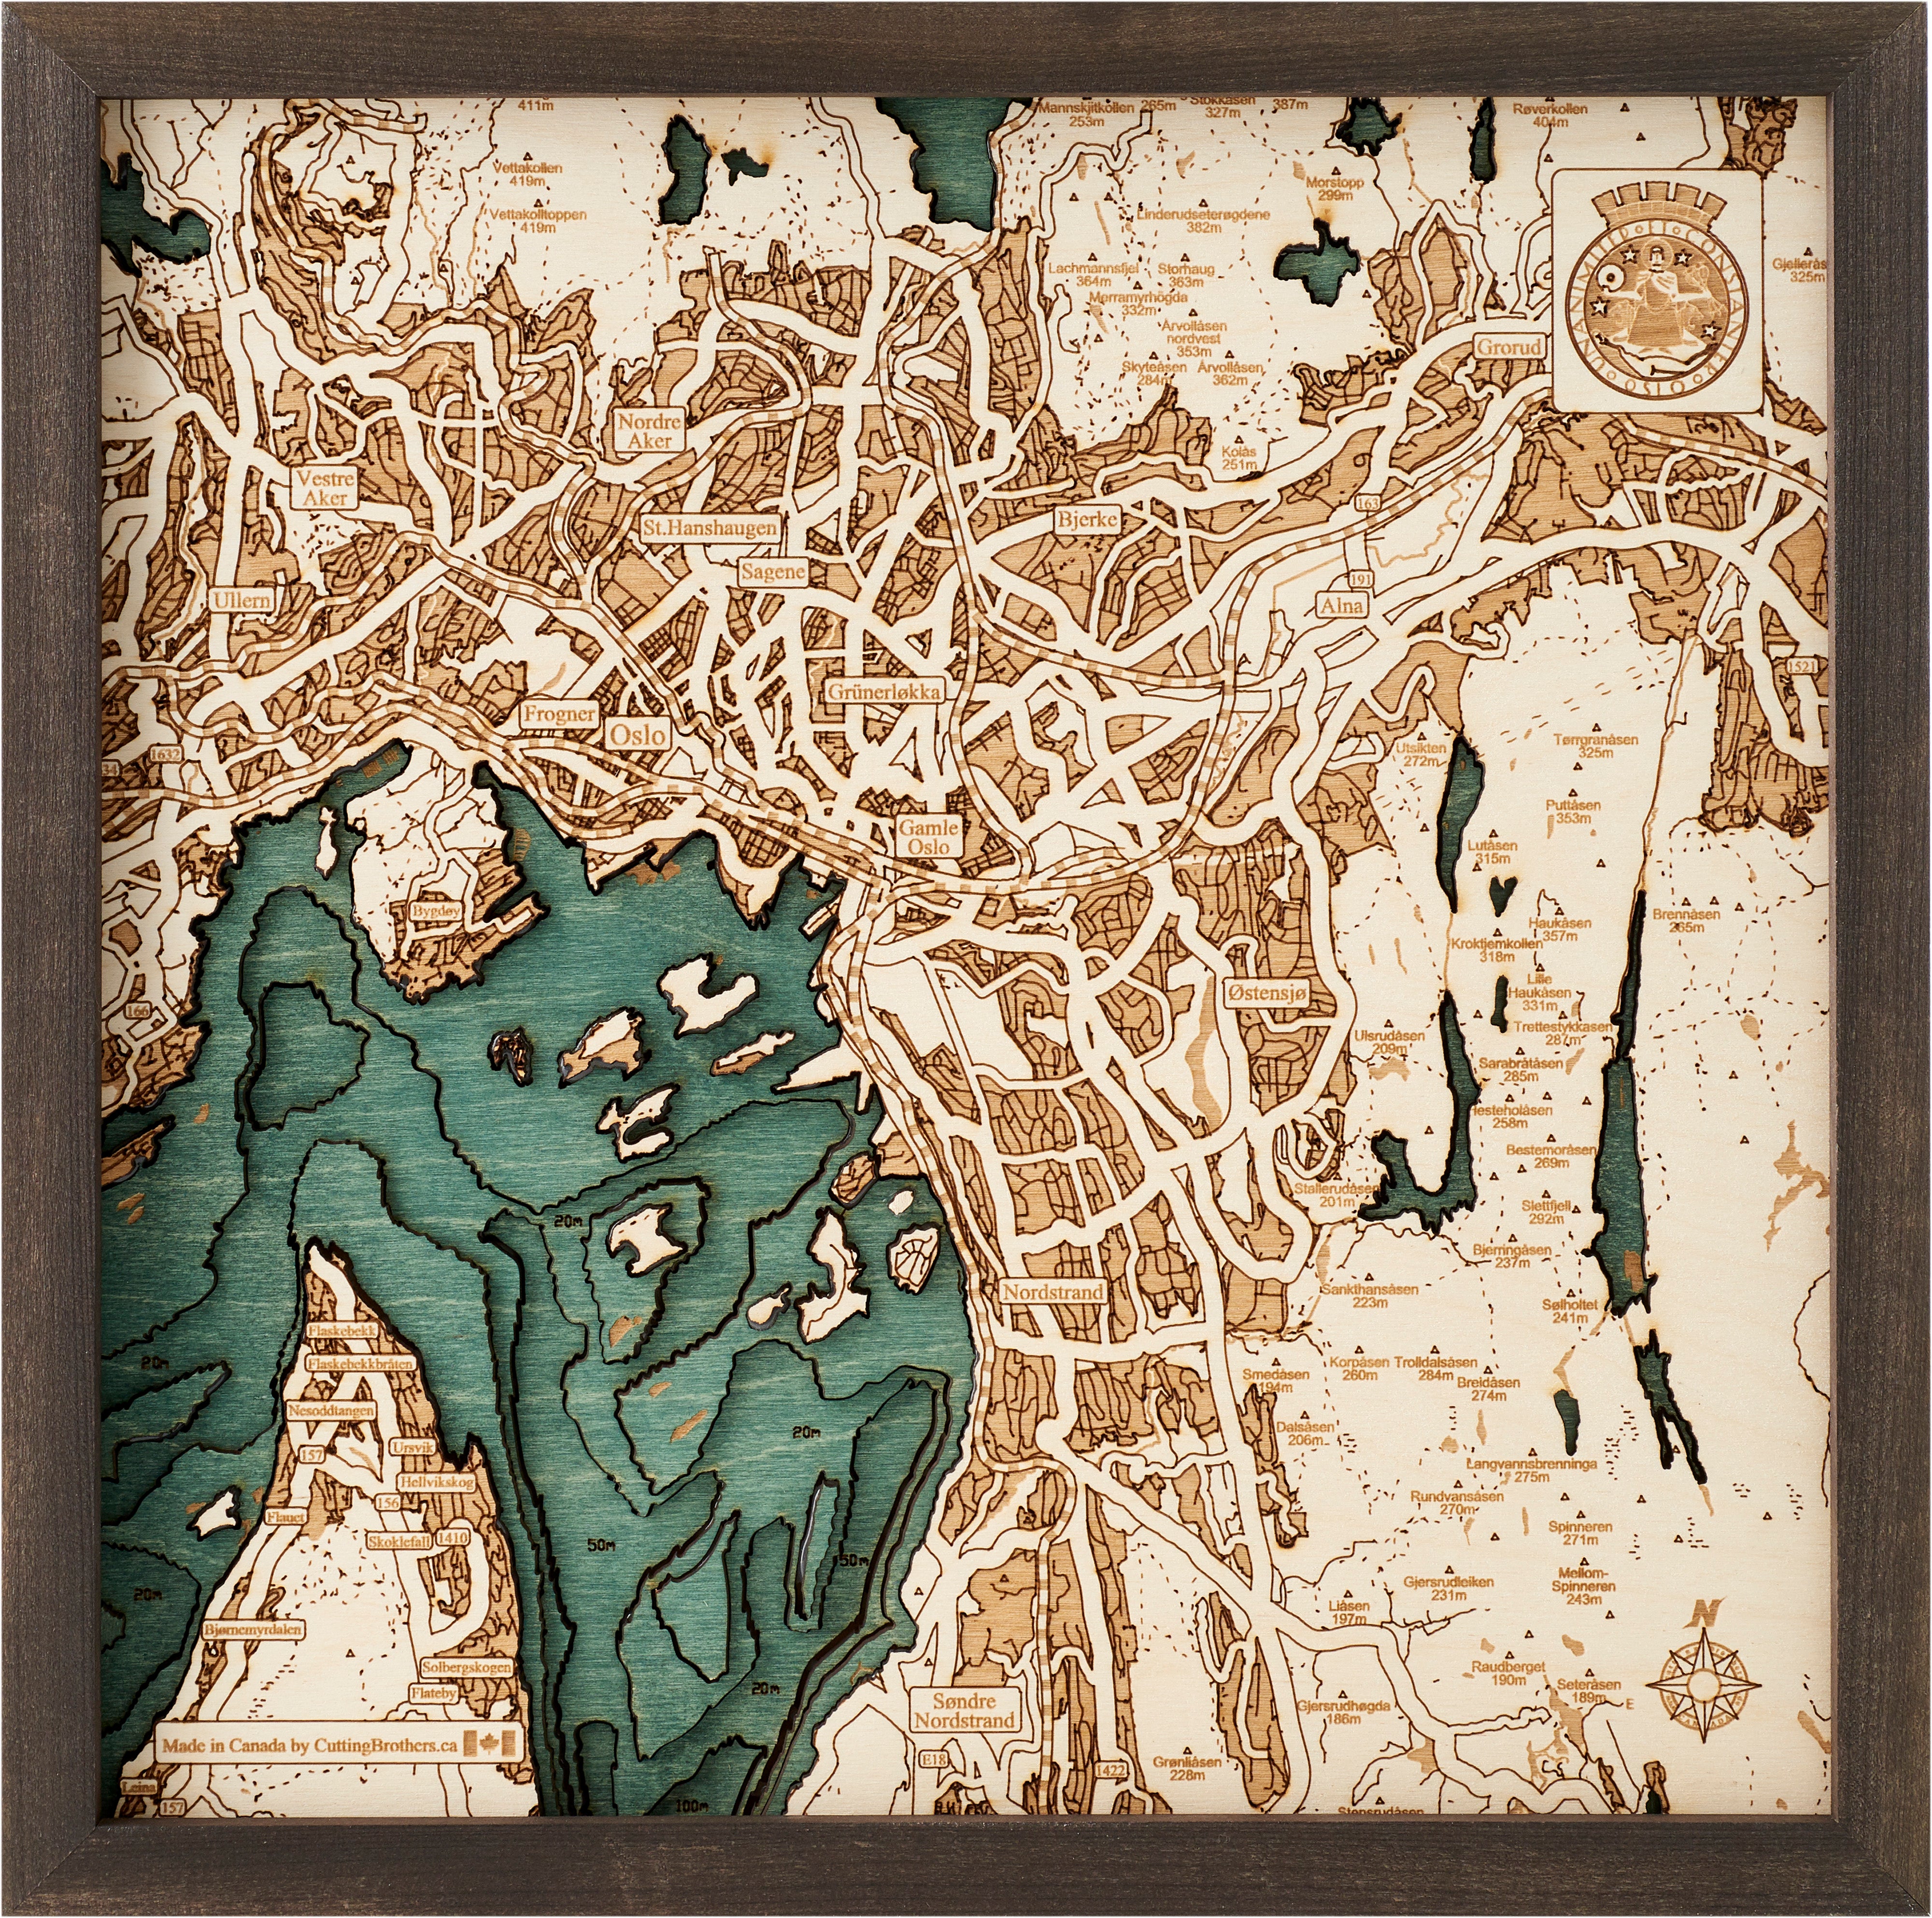 OSLO 3D Wooden Wall Map - Version S 